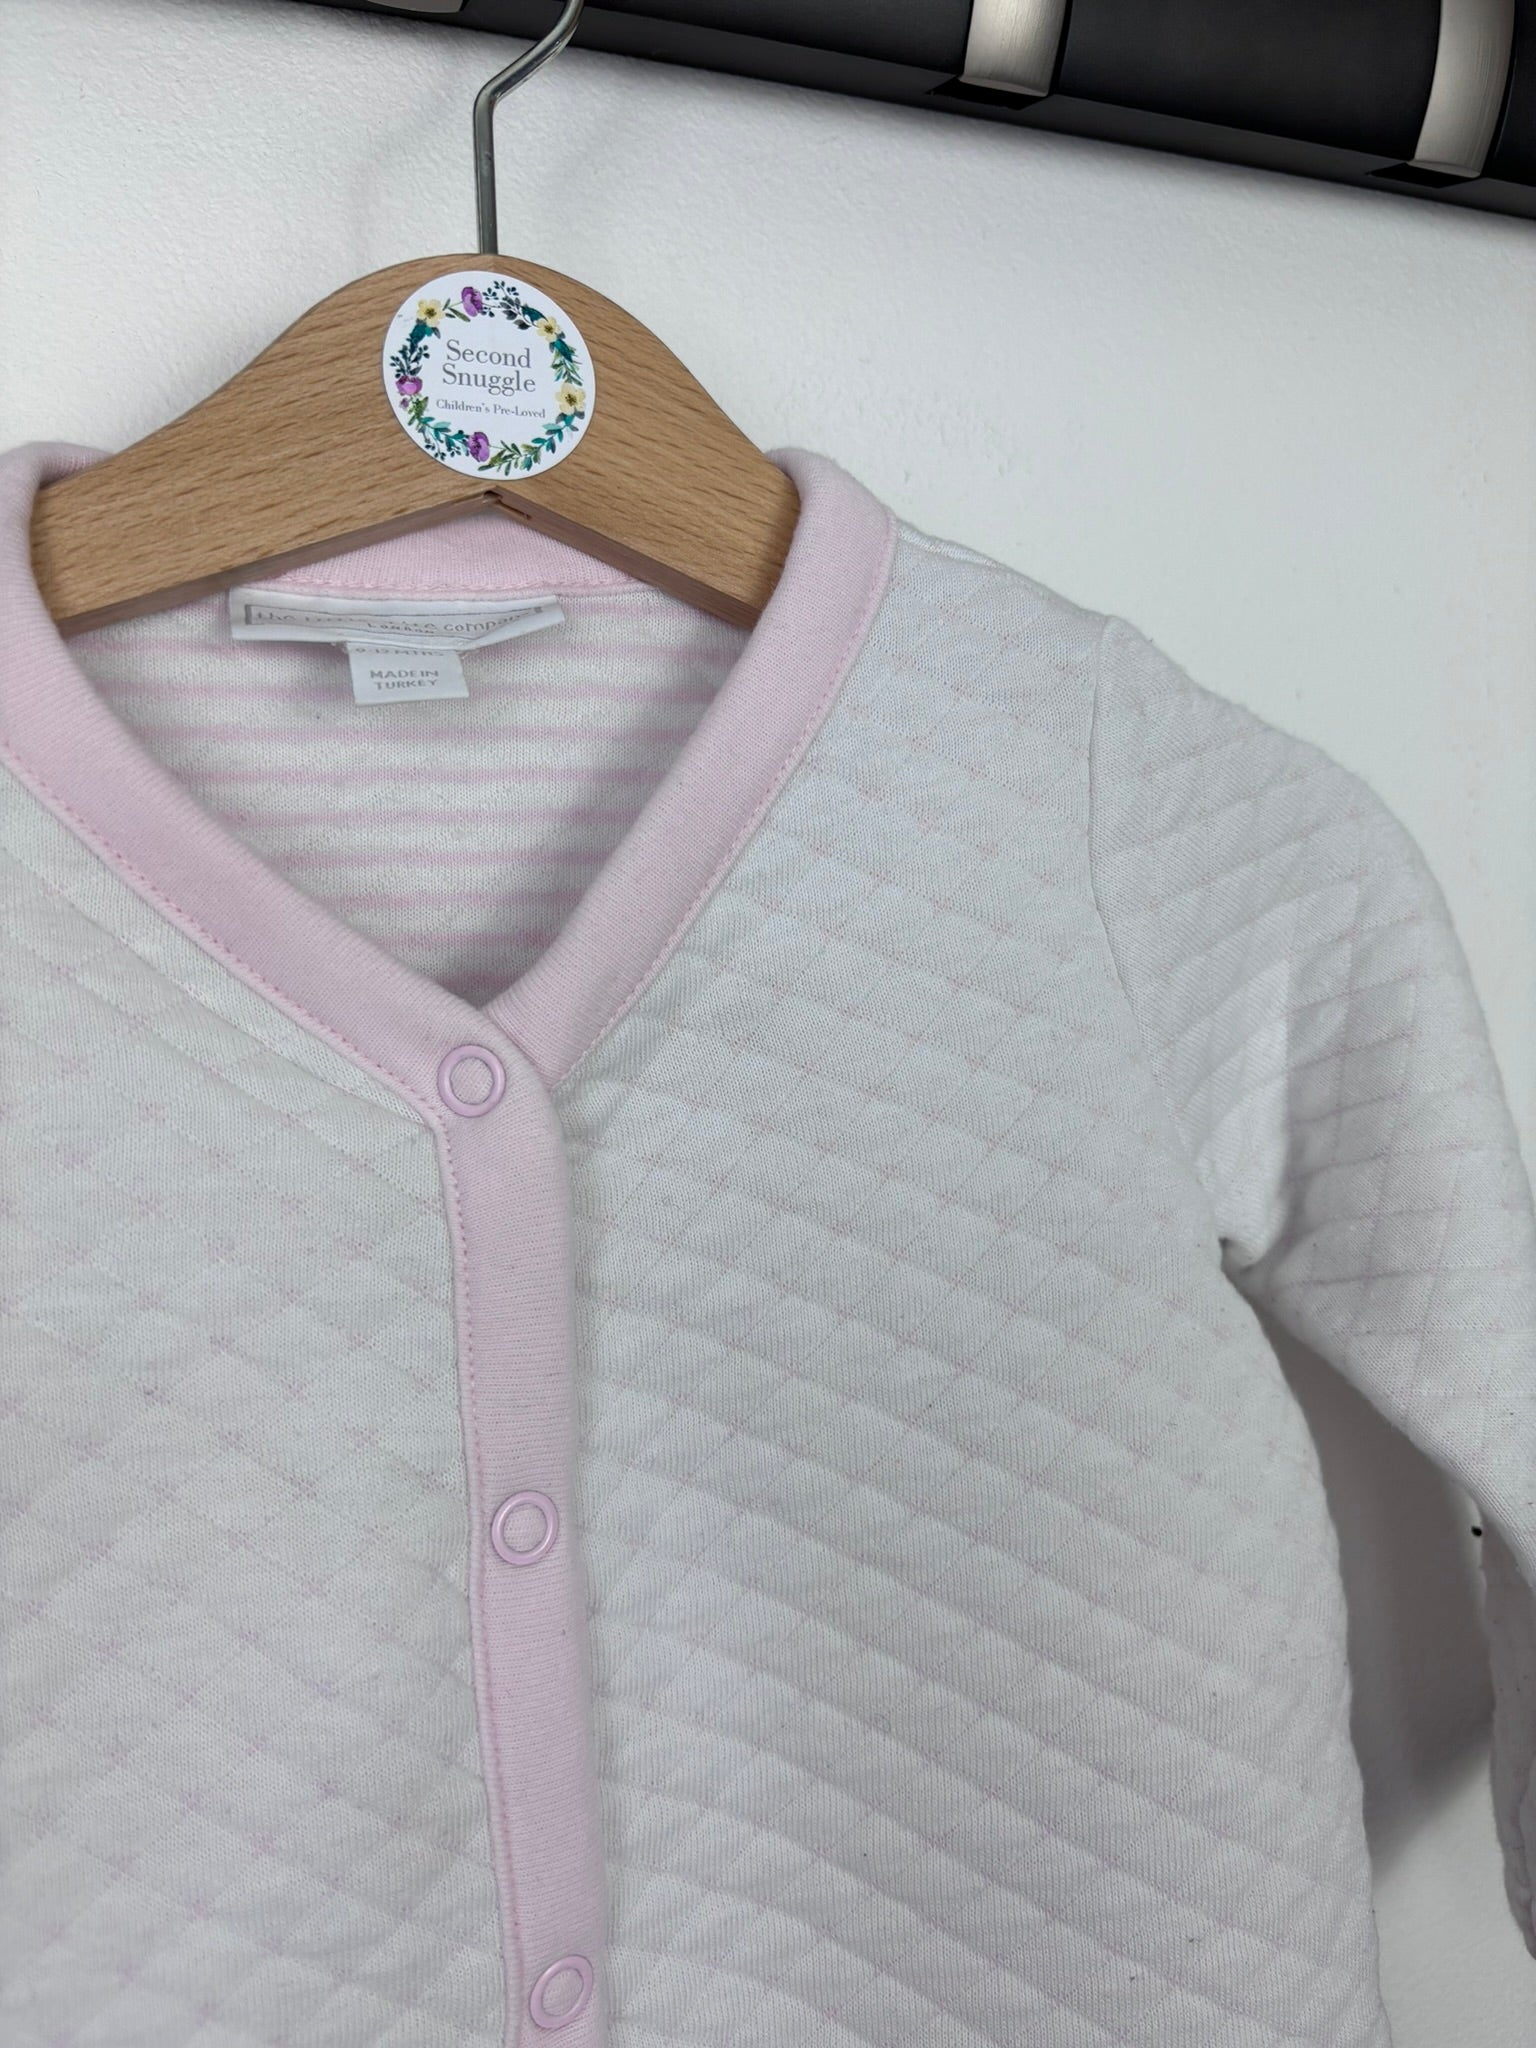 The Little White Company 9-12 Months-Sleepsuits-Second Snuggle Preloved